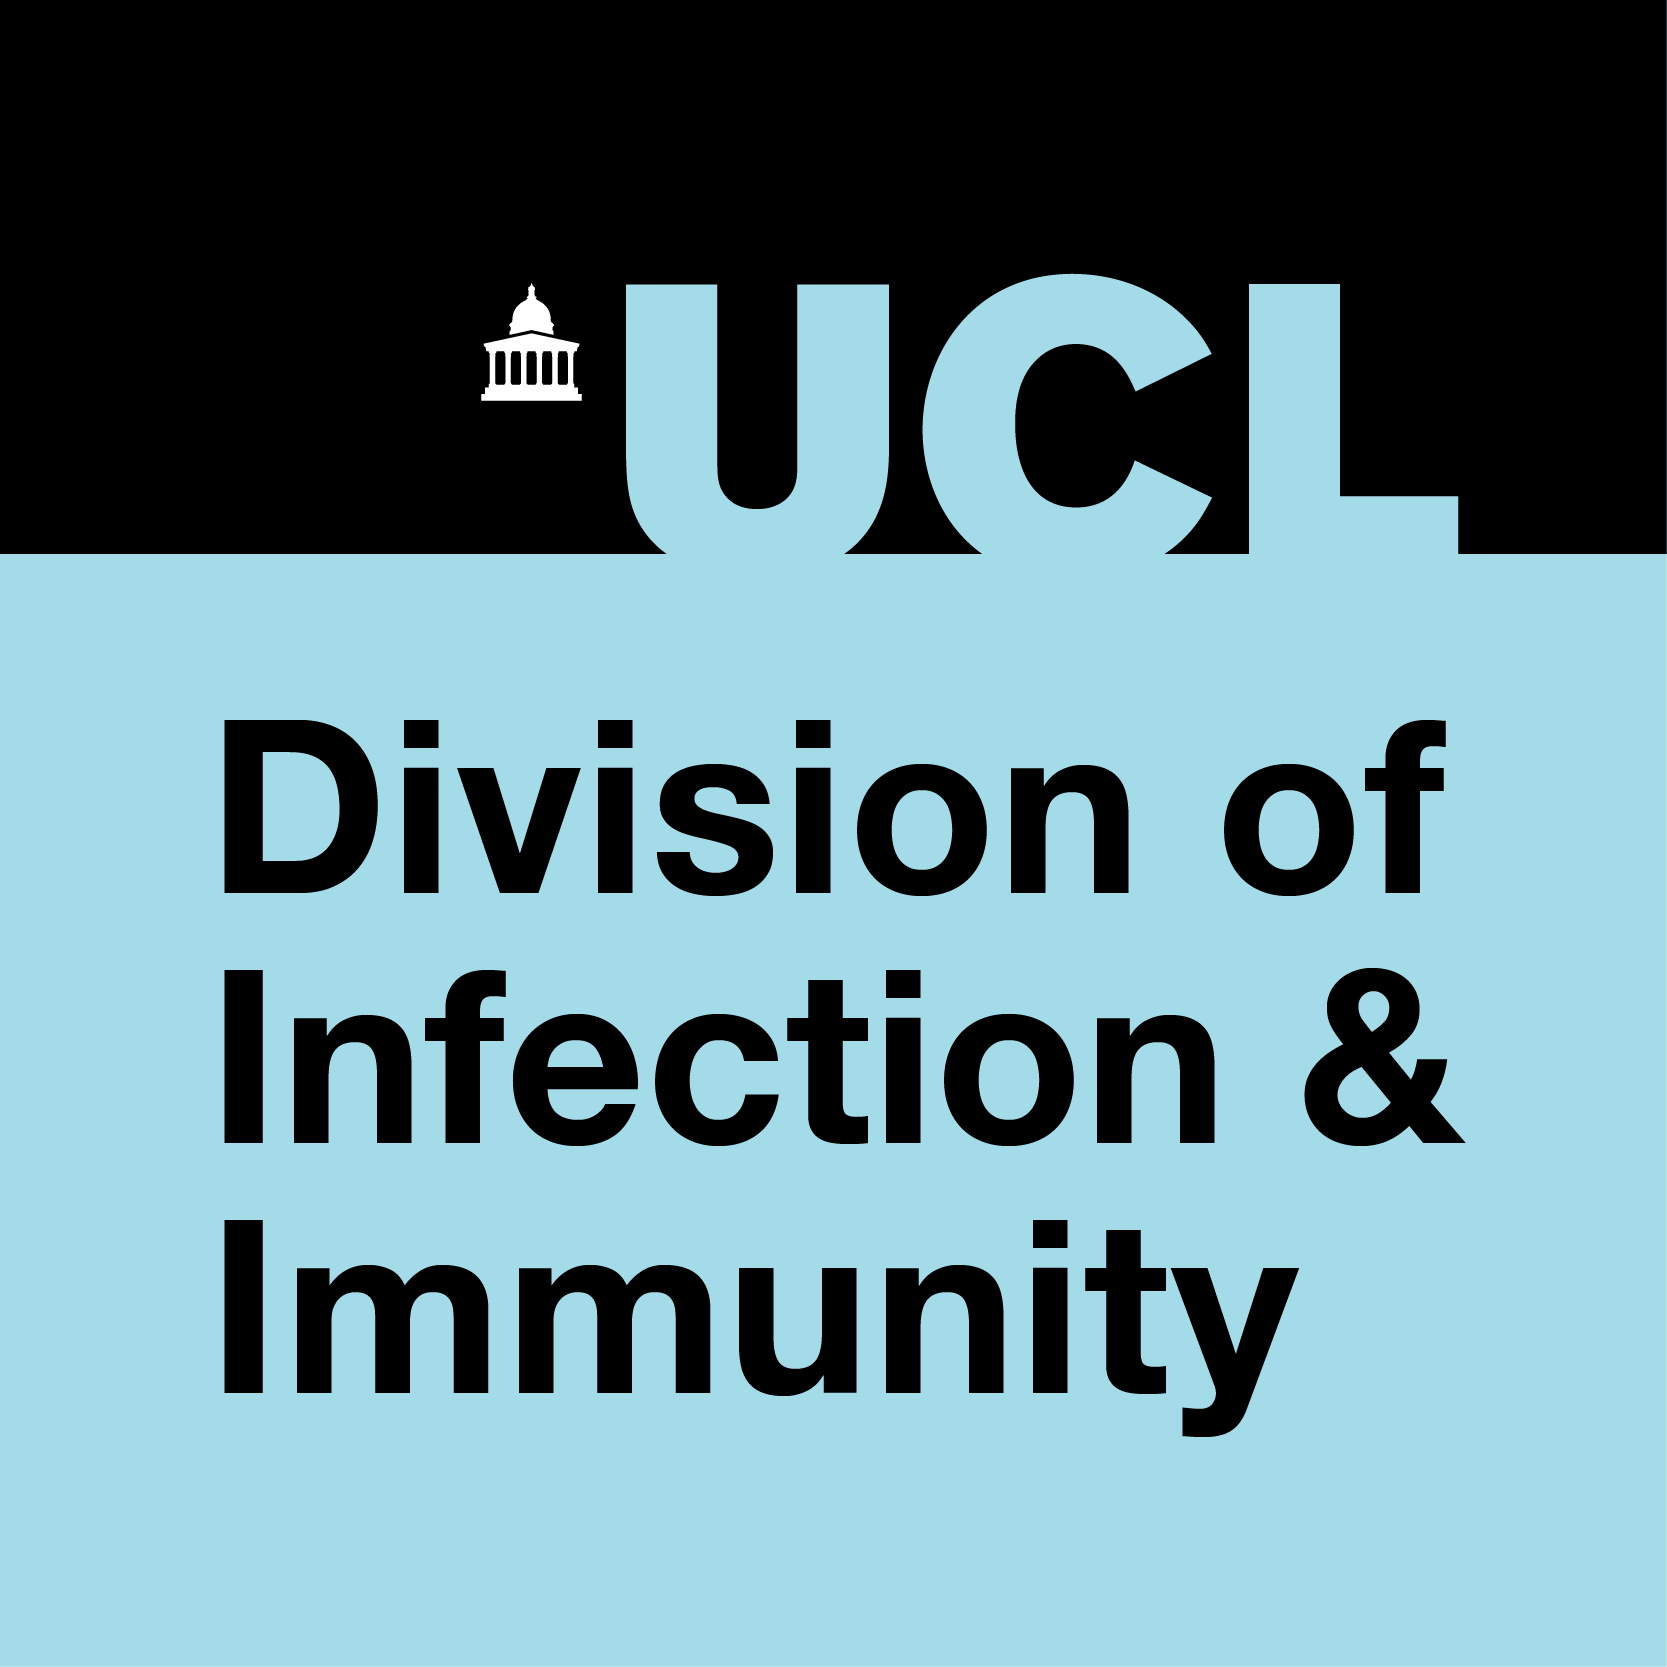 UCL Division of Infection & Immunity